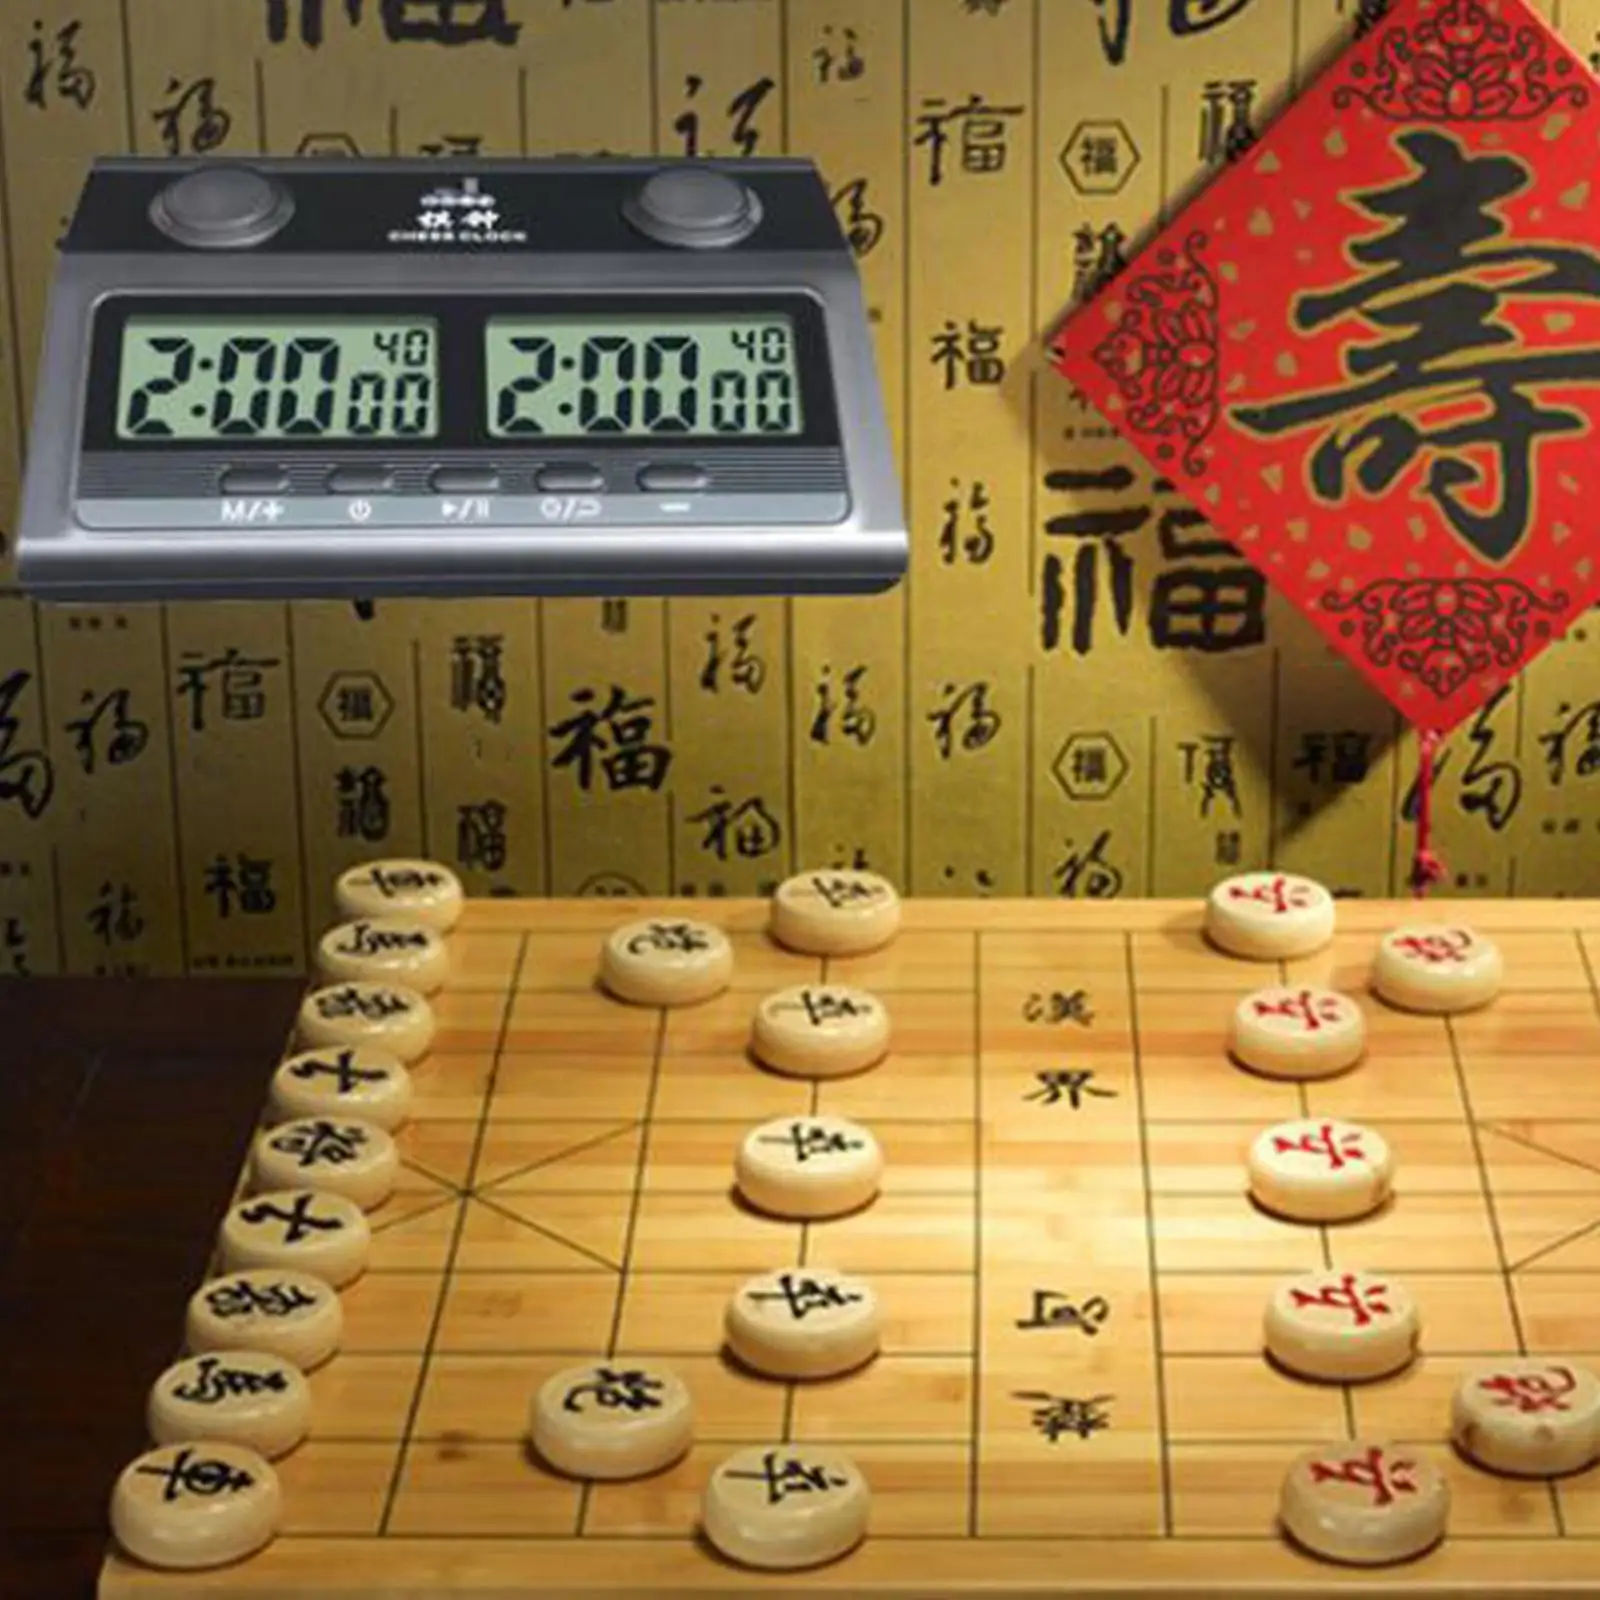 Chess Clock Board Game Timers Alarm Stop Timers for Electronic Board Game Competition